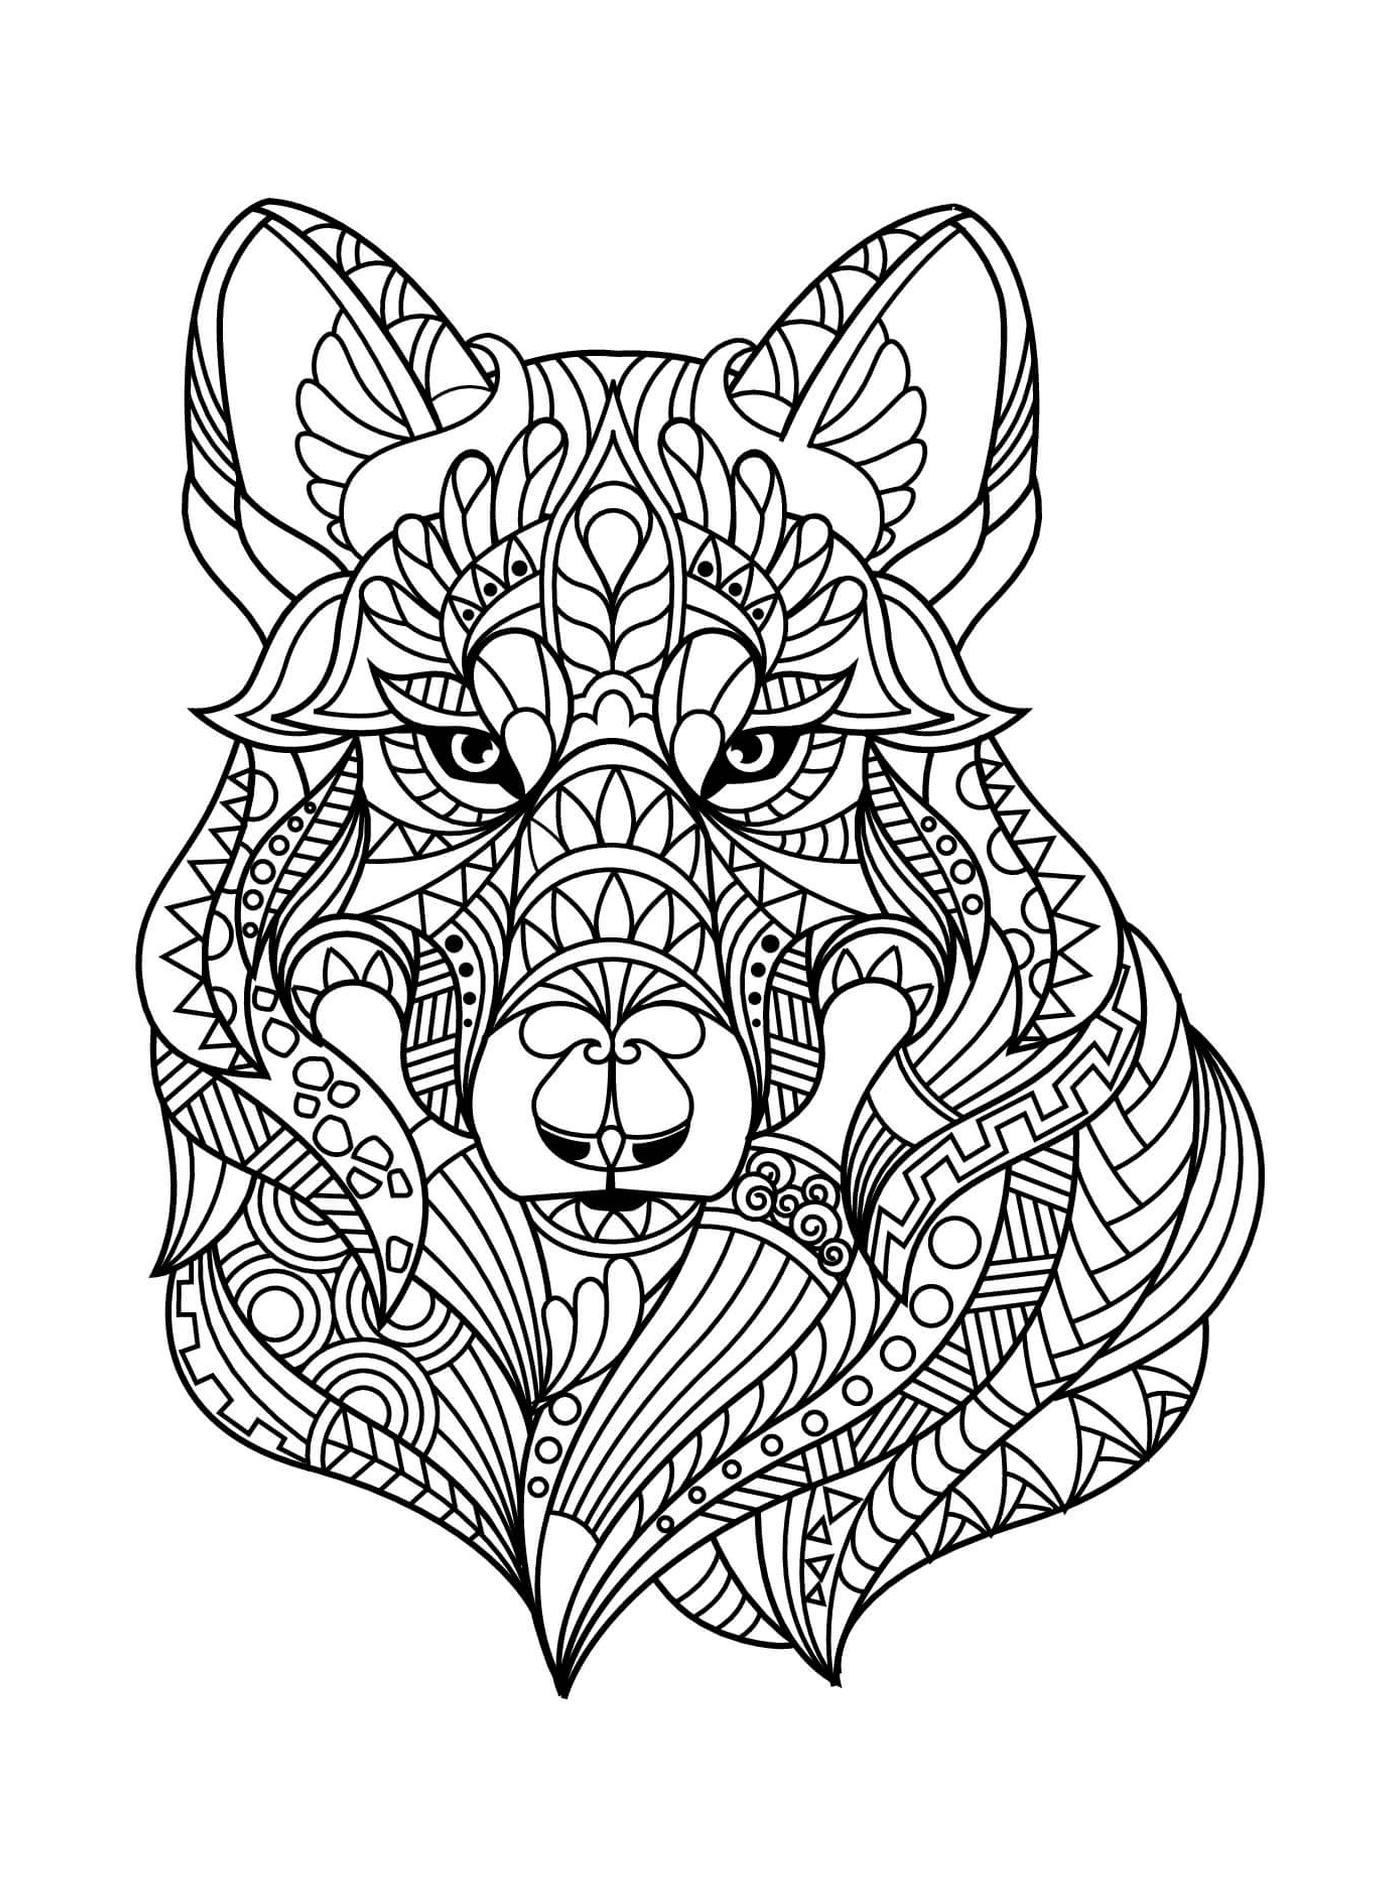  Adult animal head with a zentangle pattern 